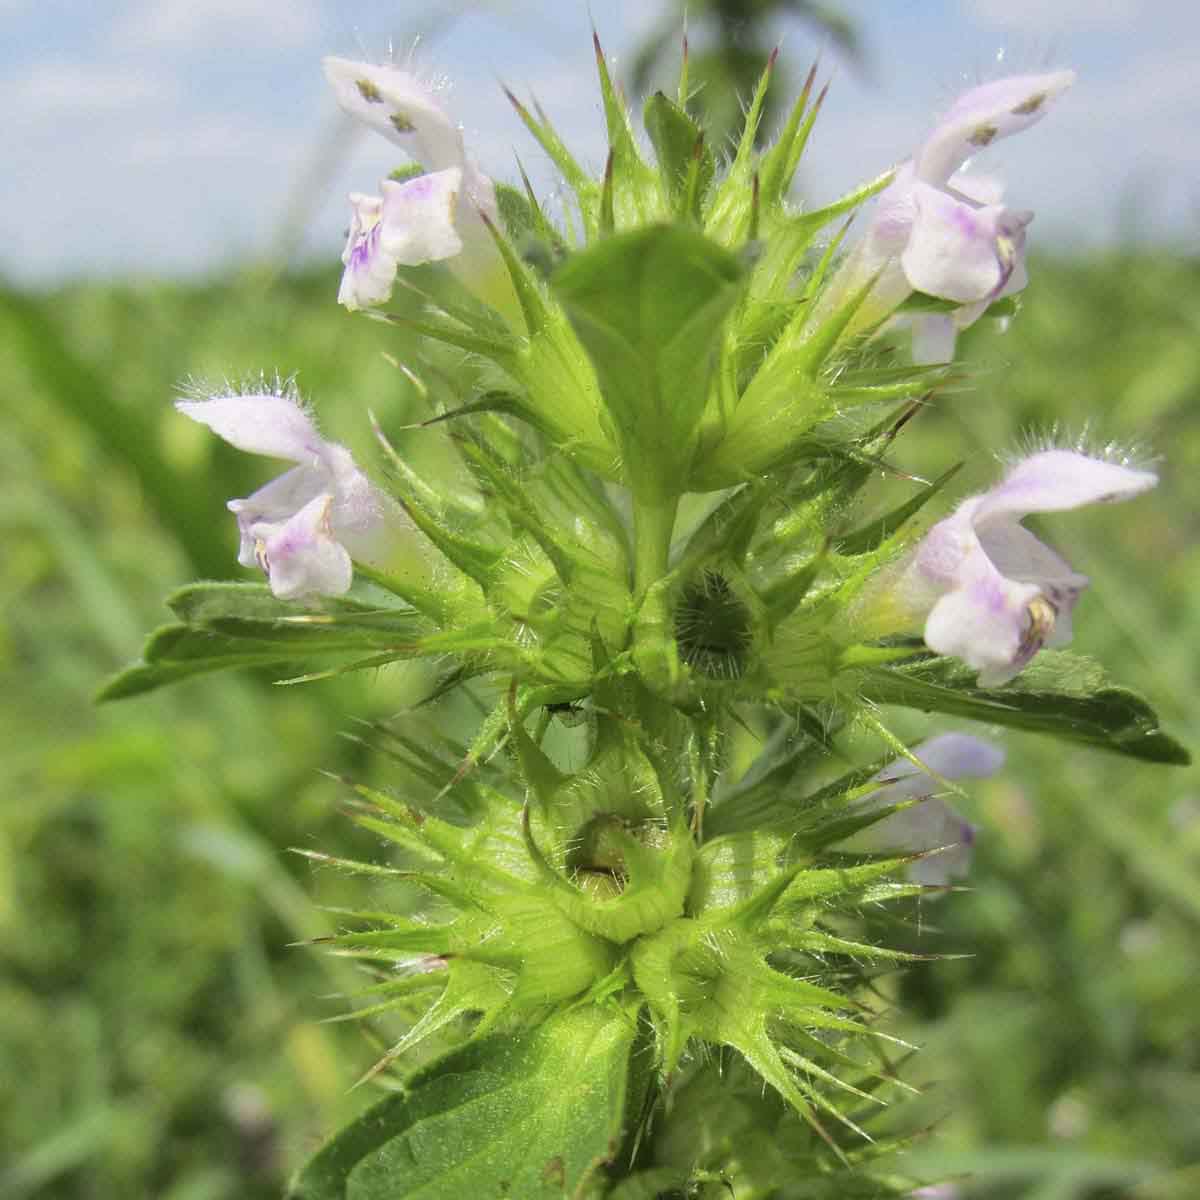 light pink flowers and spikey buds of horehound flowers